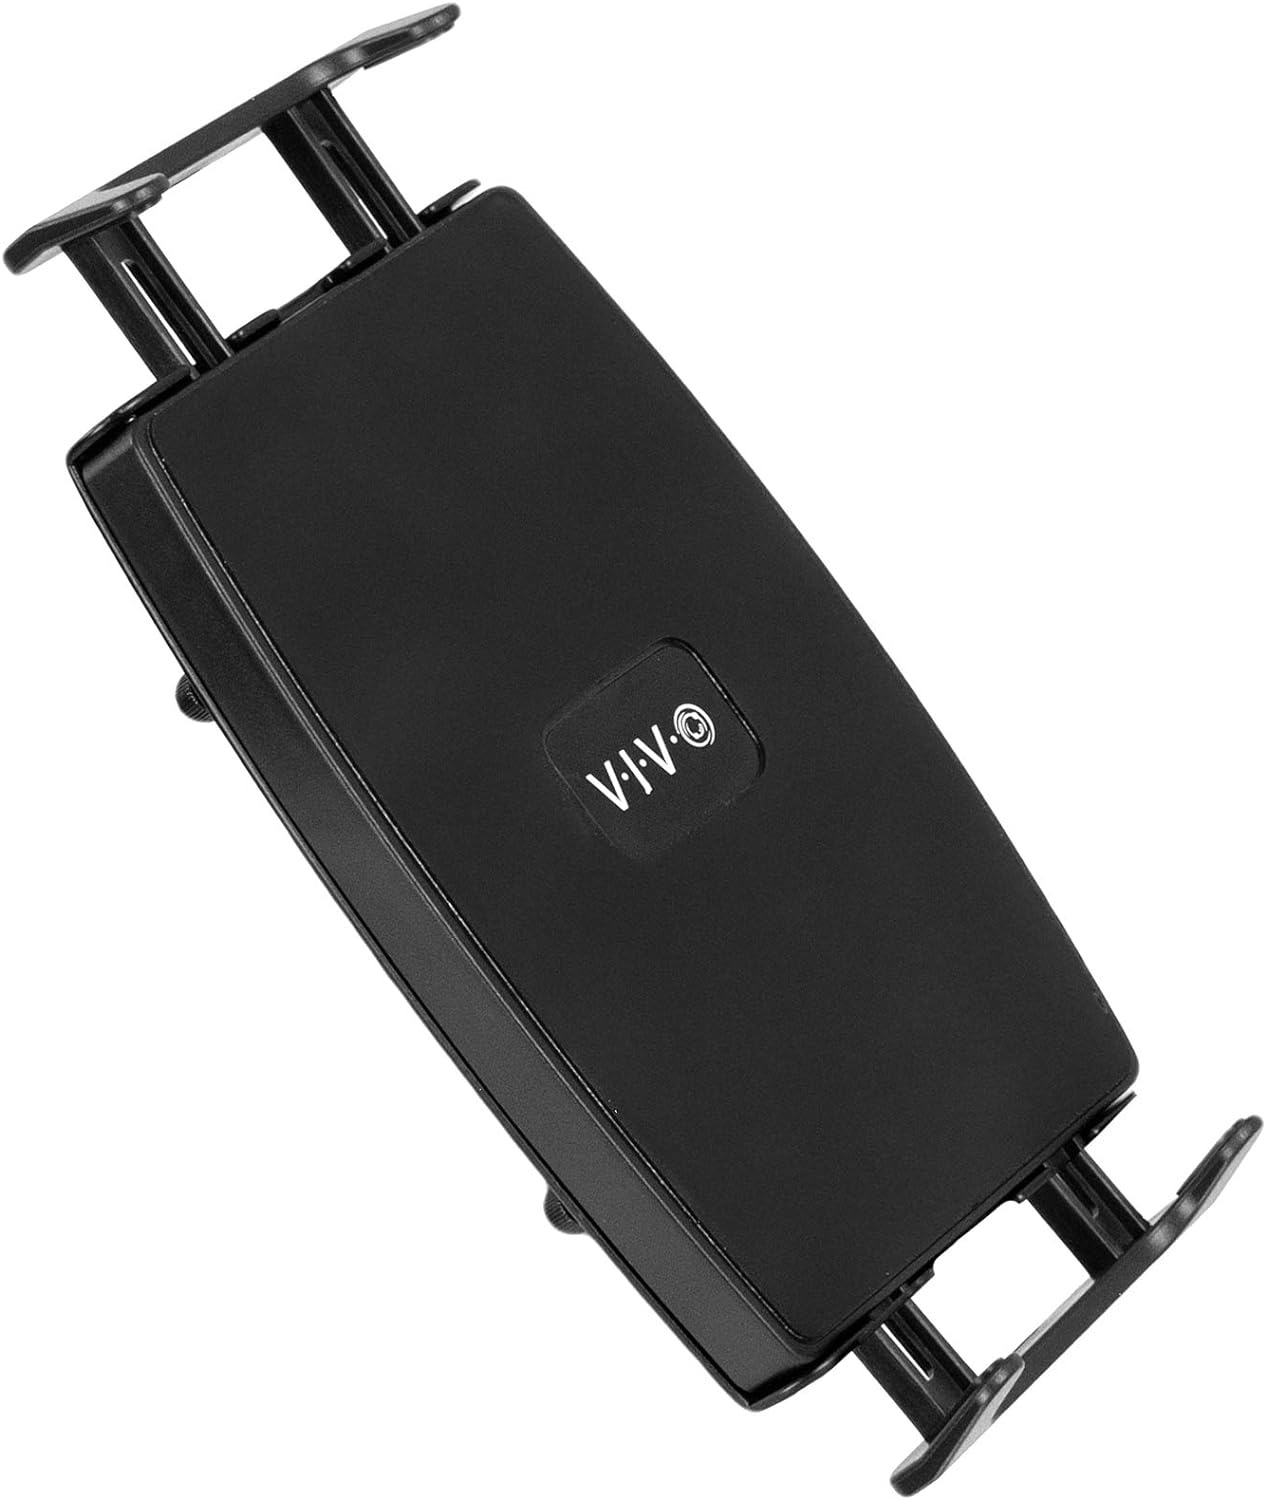 VIVO Universal VESA Mount Adapter for Tablets, 2-in-1 Laptops, & 15.6 inch Max